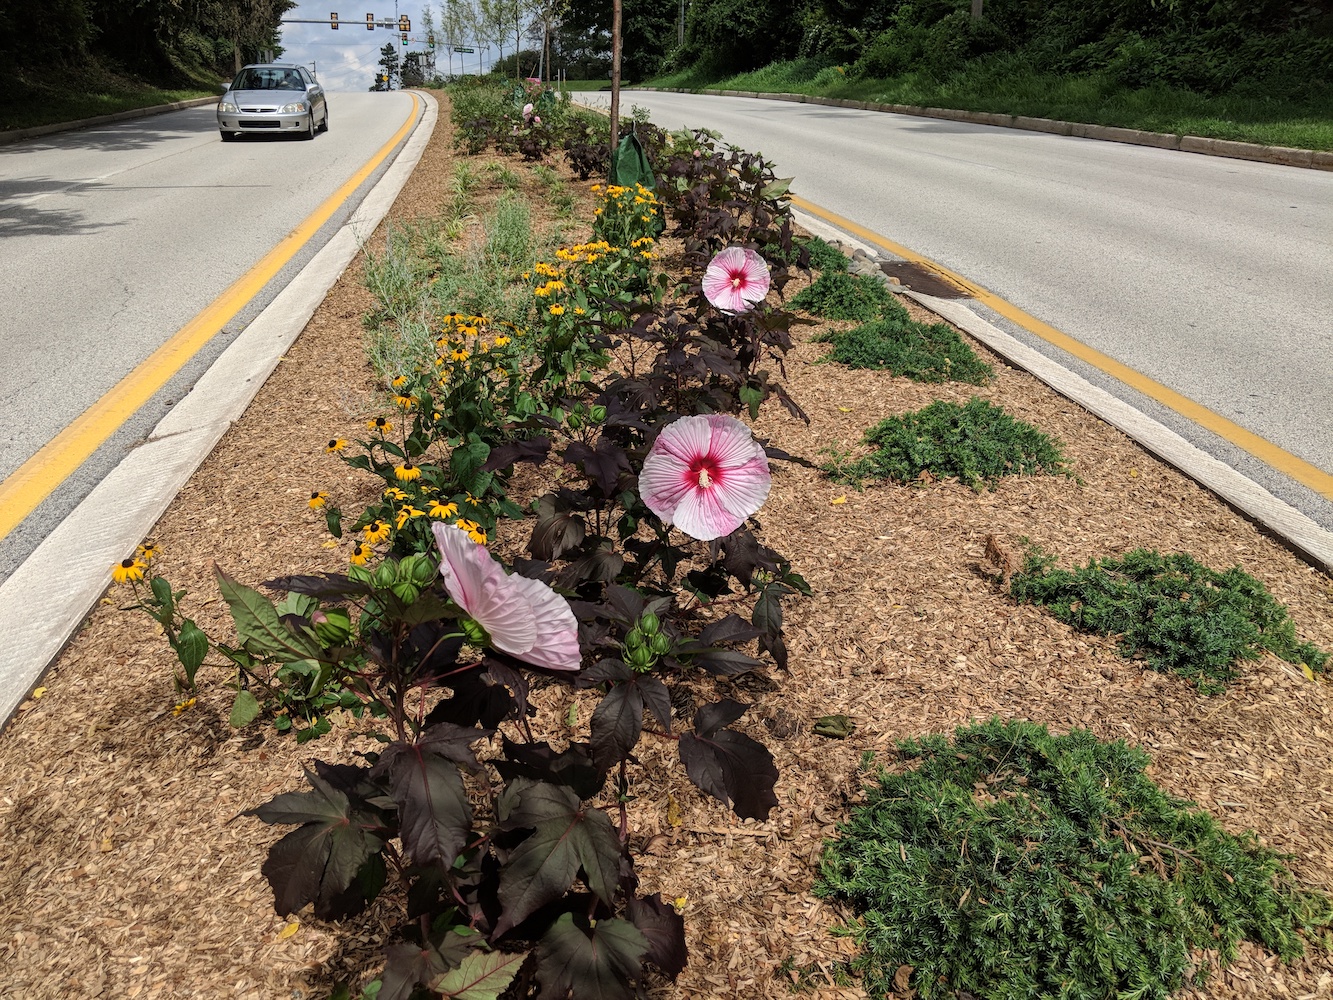 flowers and bushes in a road median